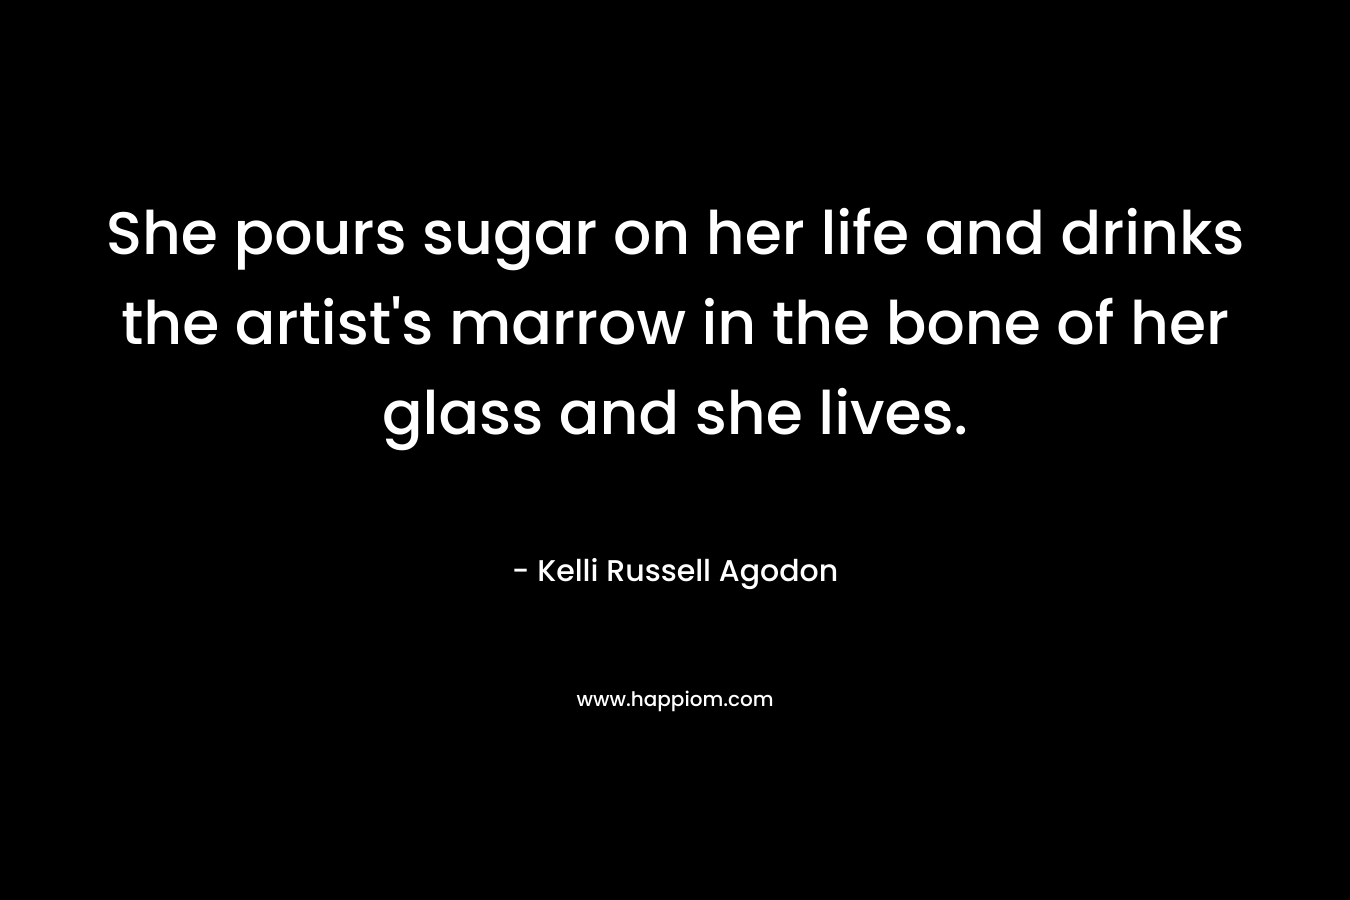 She pours sugar on her life and drinks the artist’s marrow in the bone of her glass and she lives. – Kelli Russell Agodon